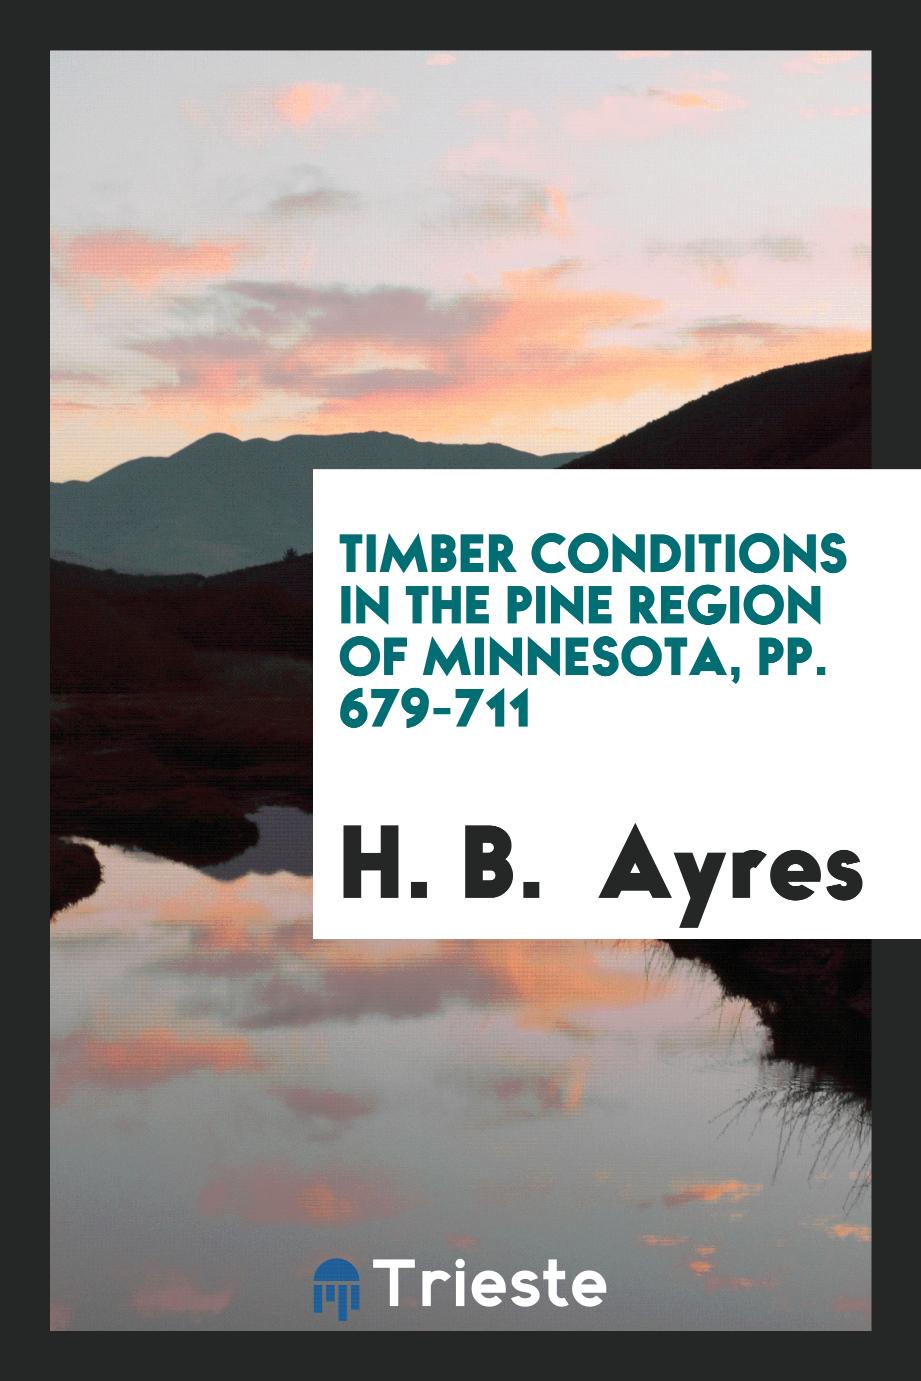 Timber Conditions in the Pine Region of Minnesota, pp. 679-711